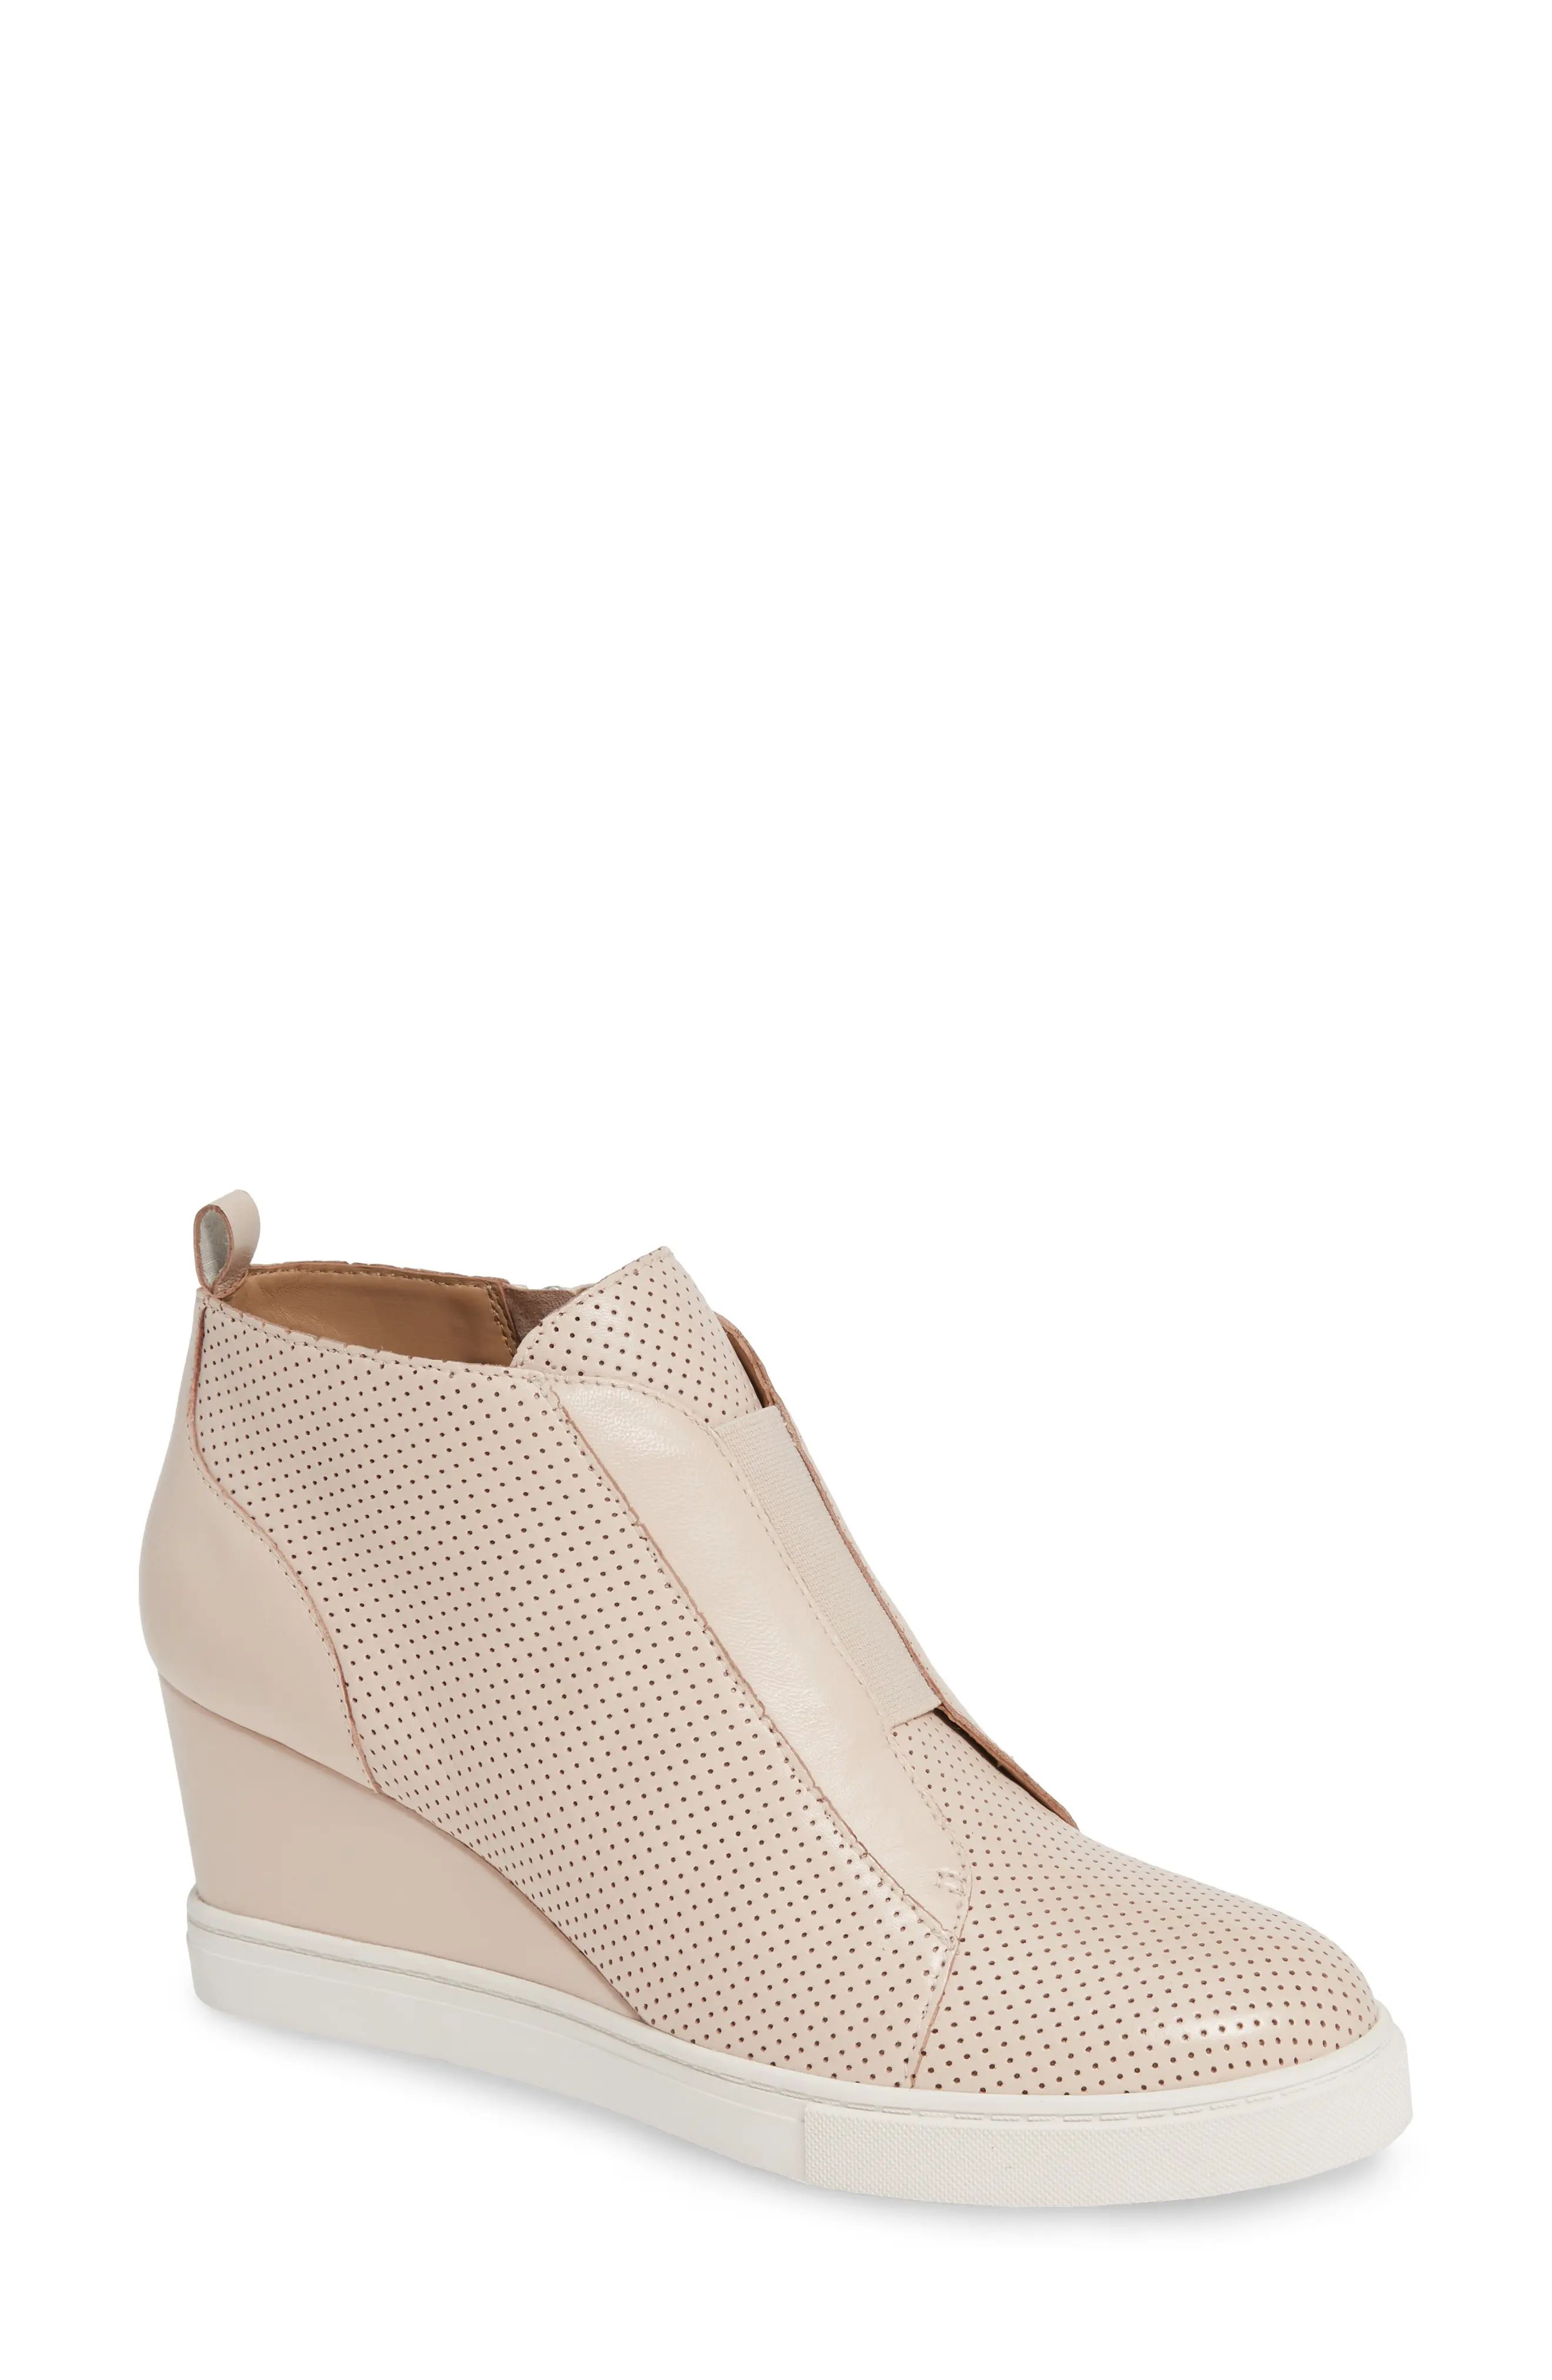 Women's Linea Paolo Felicia Wedge Bootie, Size 4 M - Pink | Nordstrom